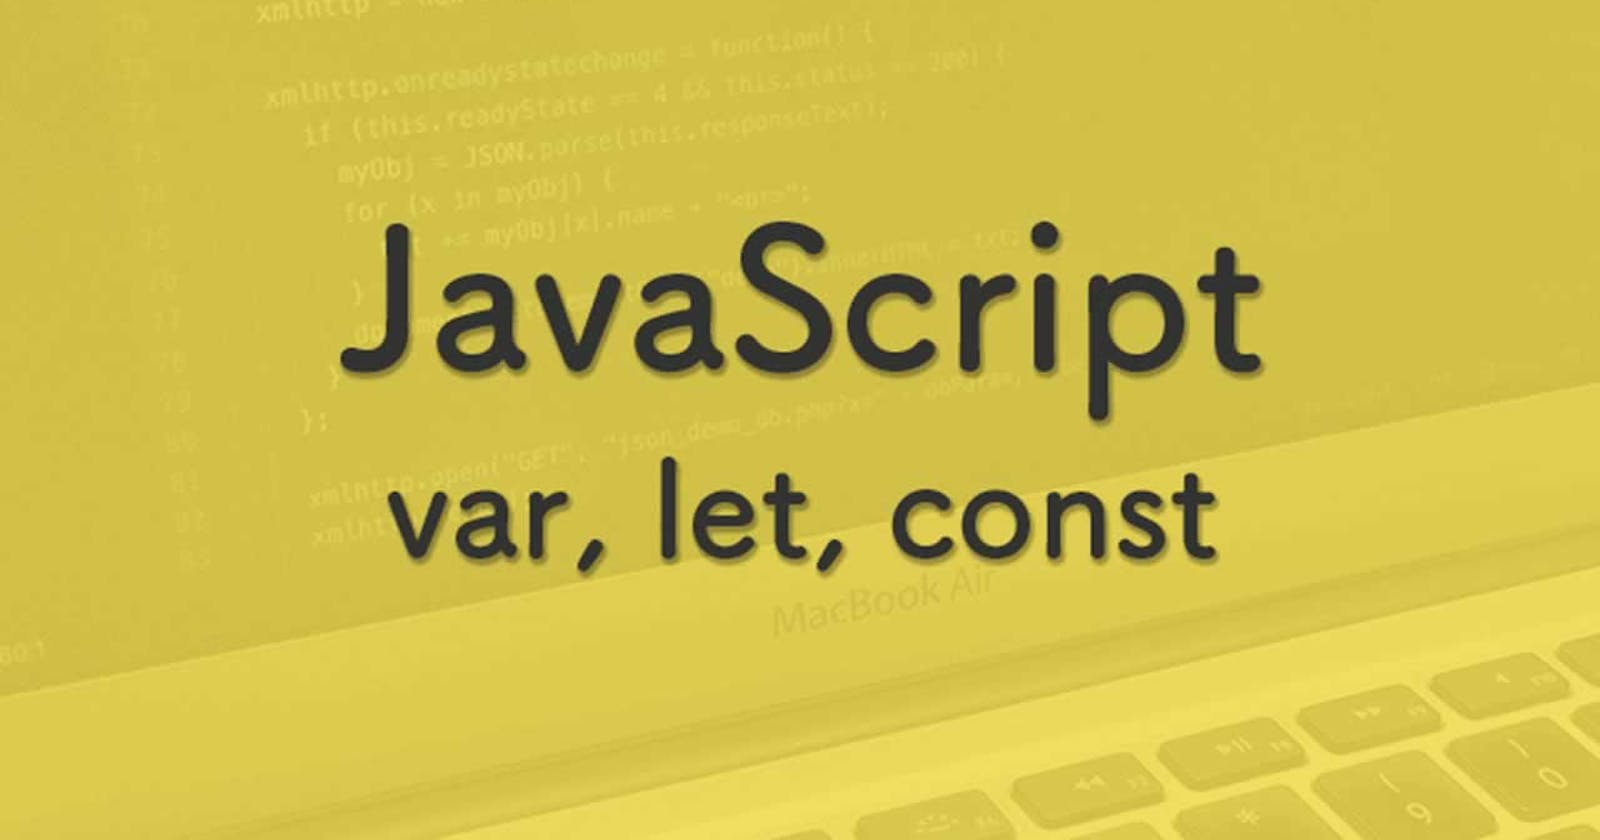 What are the differences between var, let, and const in JavaScript?